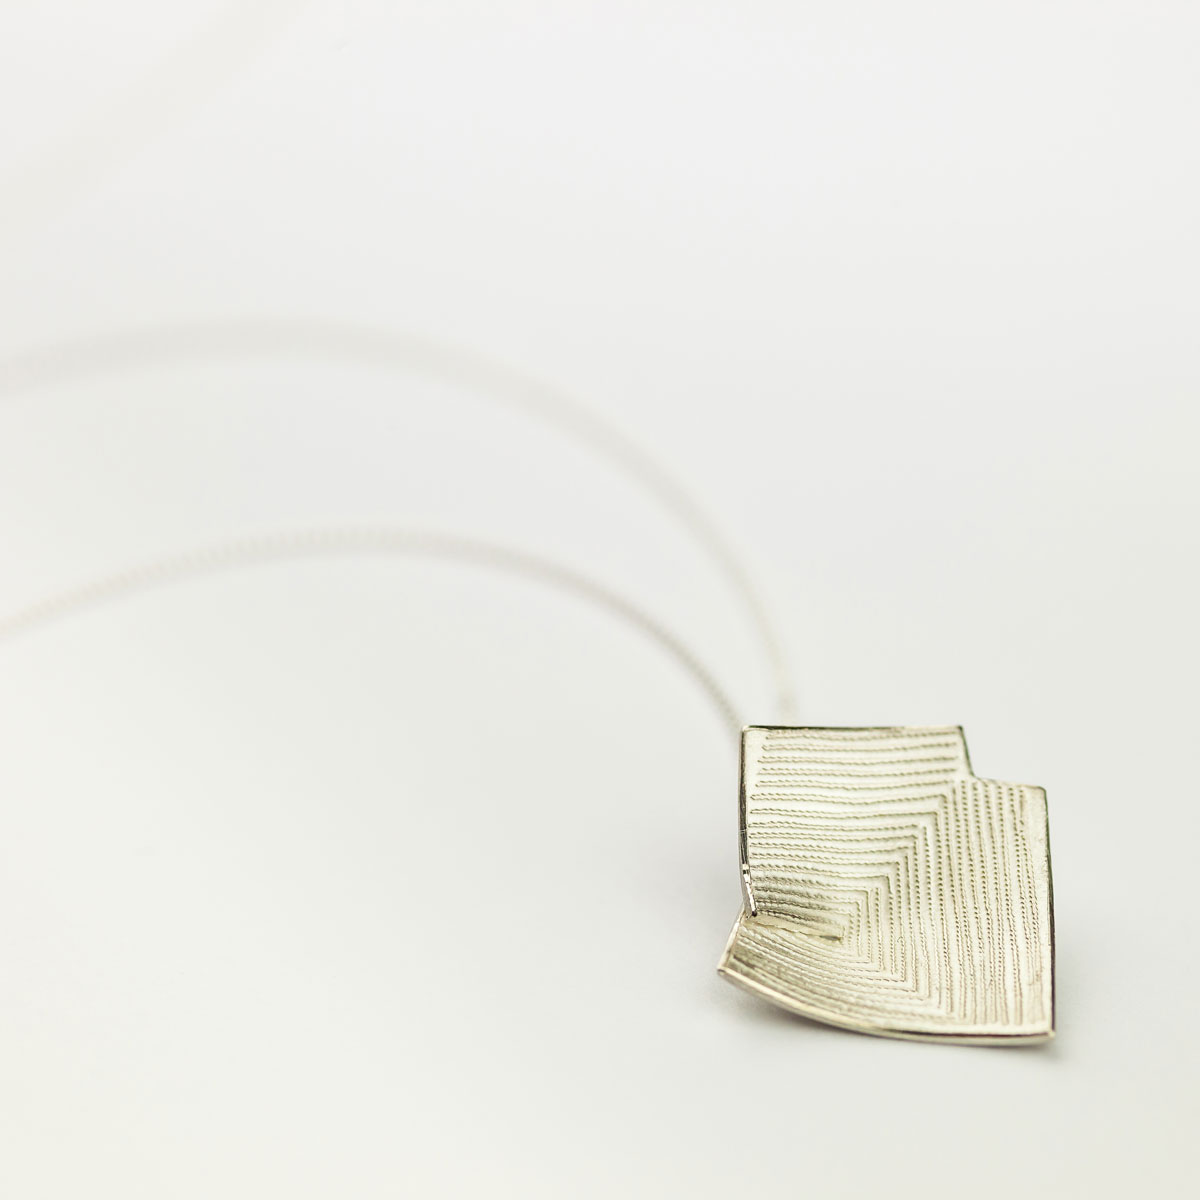 ‘Lines in Motion’ Silver Pendant